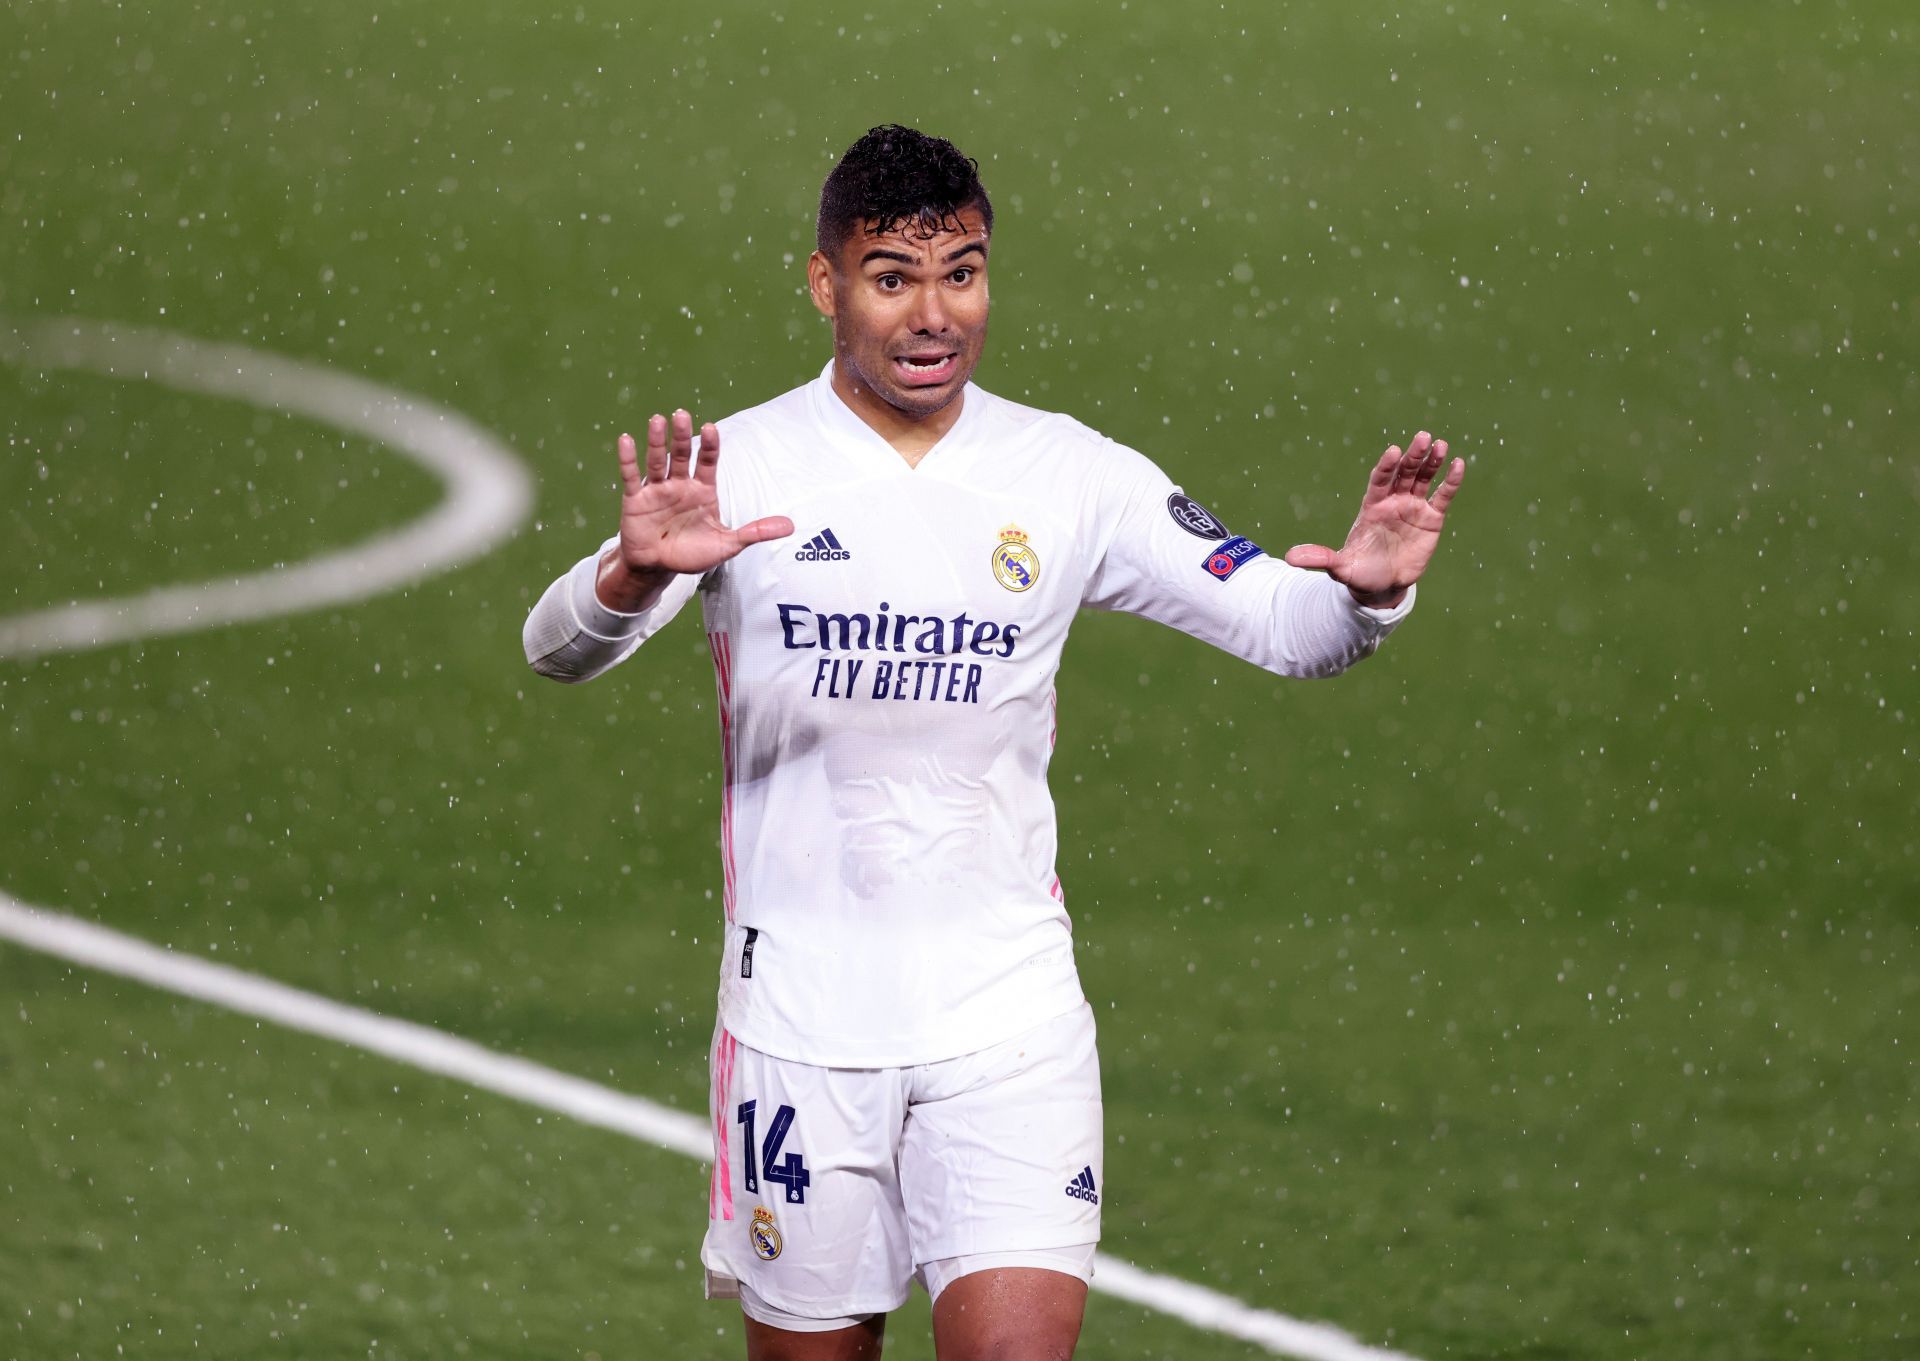 Casemiro has been a consistent performer for Los Blancos